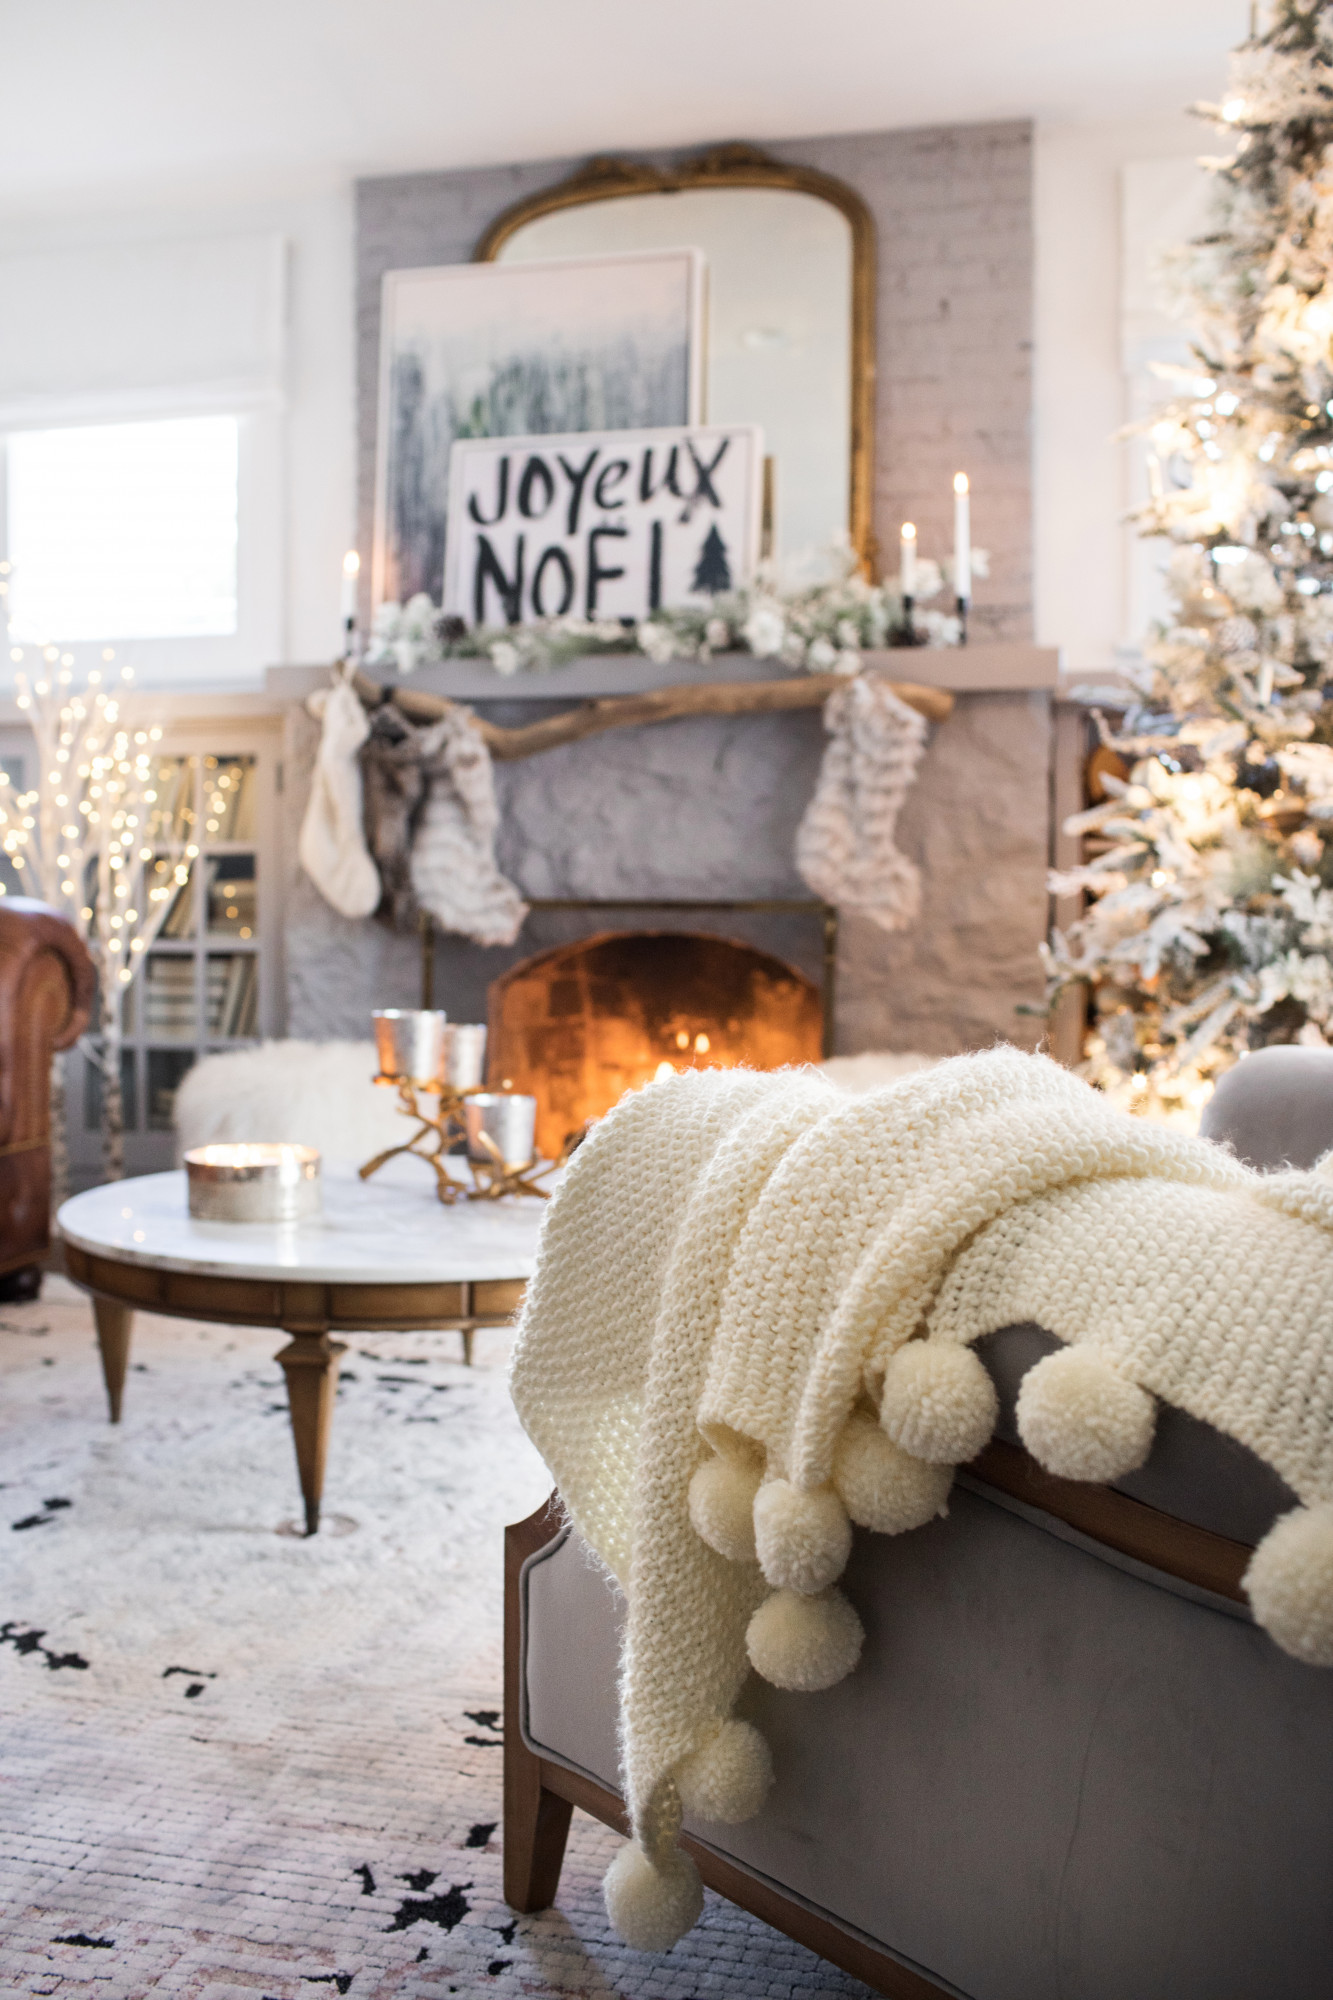 Cozy Scene in an Enchanting Fireplace Room Featuring Lindsay Letters Artwork